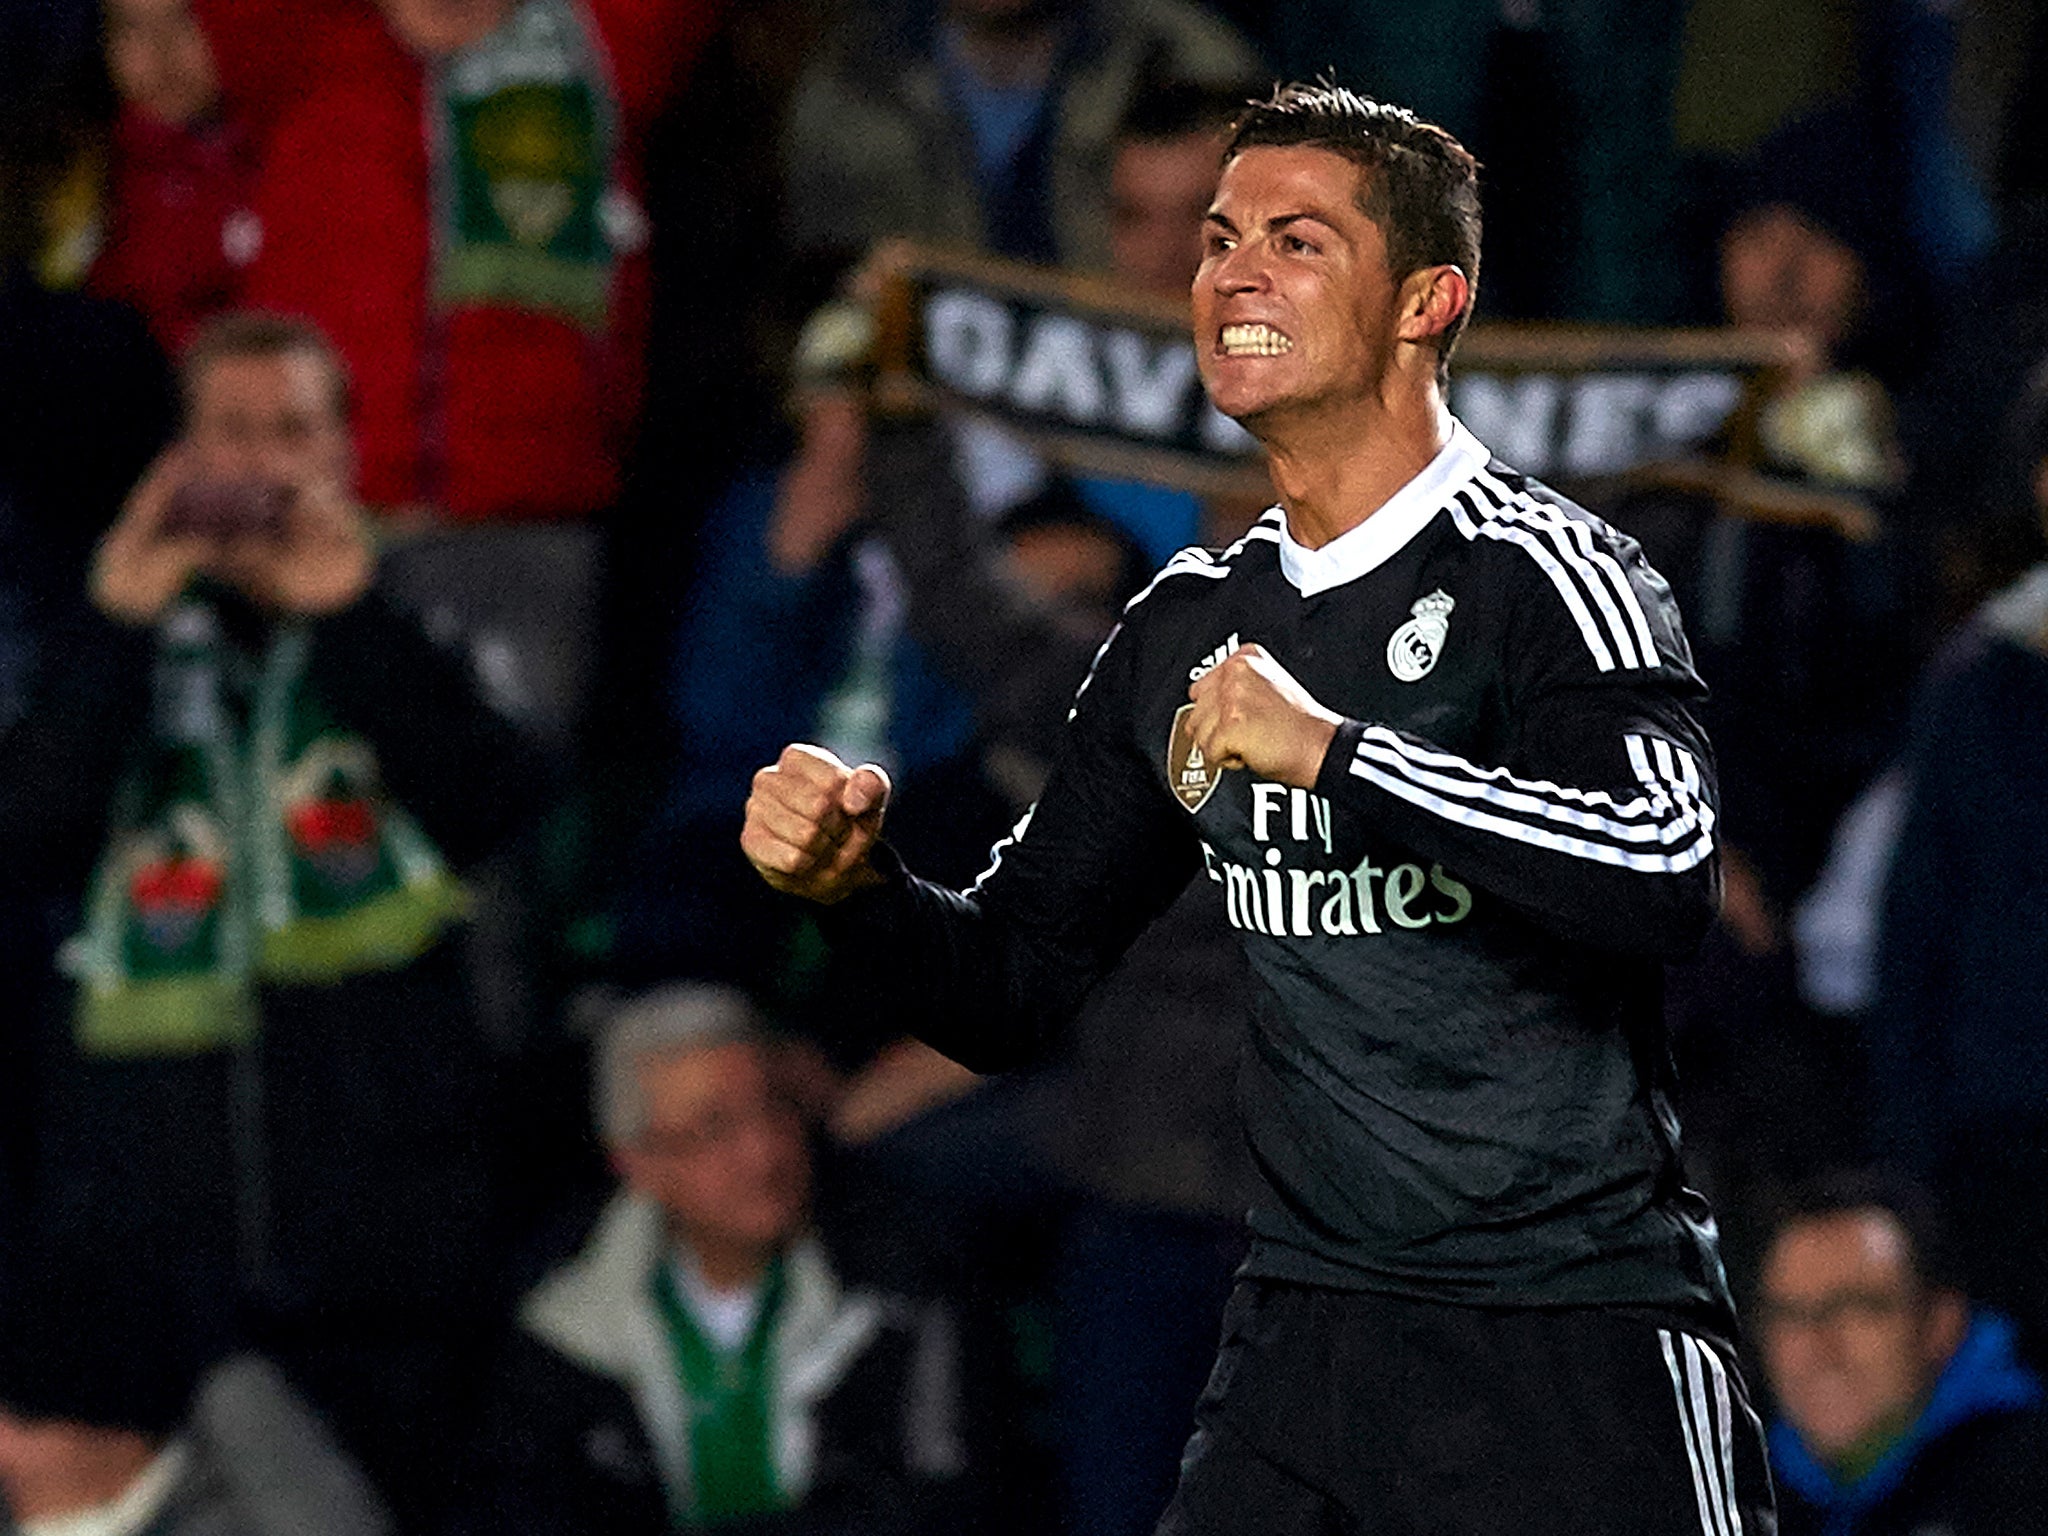 Cristiano Ronaldo of Real Madrid celebrates after scoring during the La Liga match against Elche